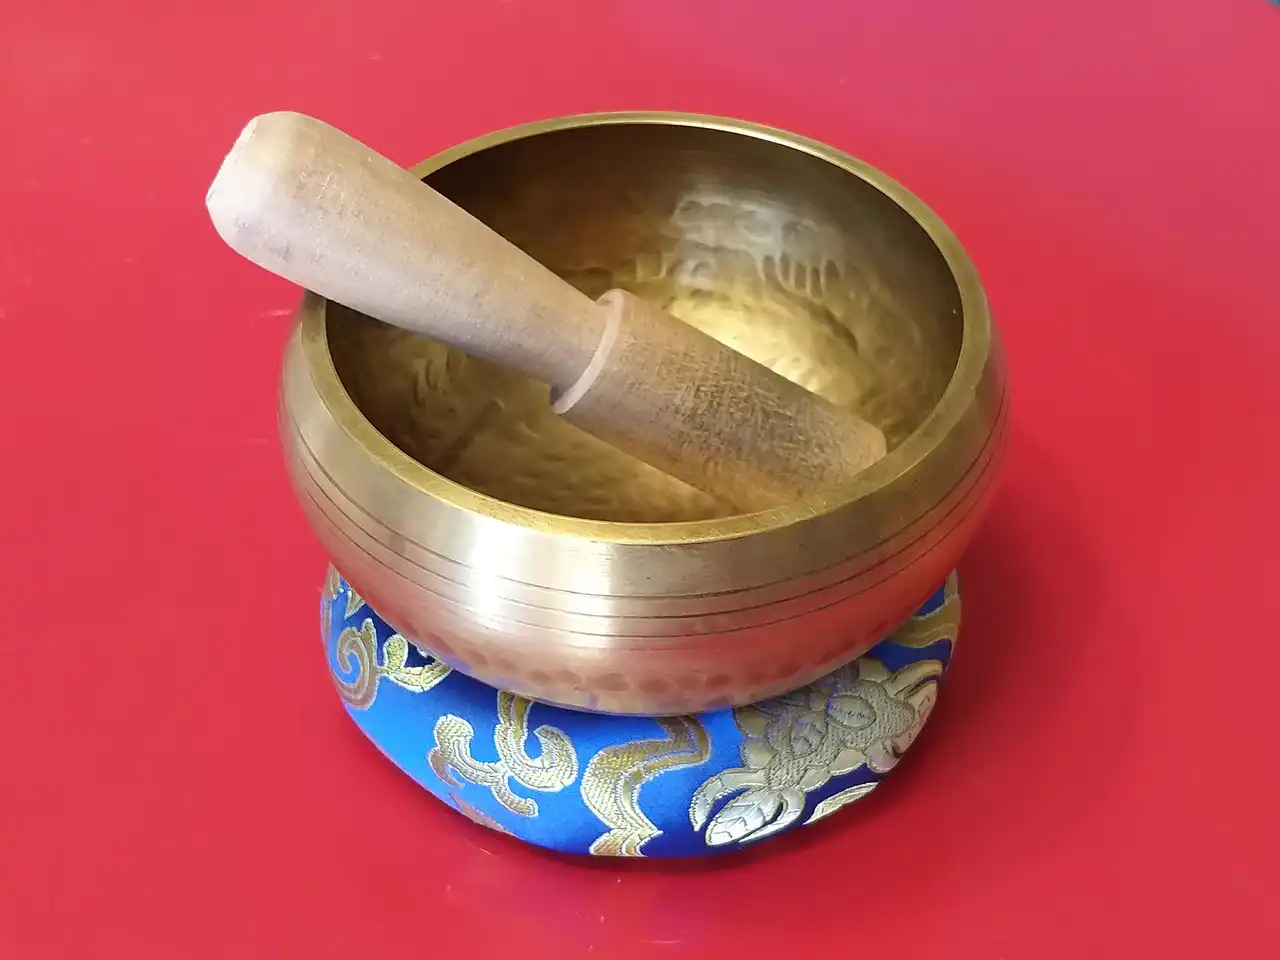 A Tibetan singing bowl: a brass-colored concave metal bowl resting on a small blue cushion. The bowl contains a wooden mallet.